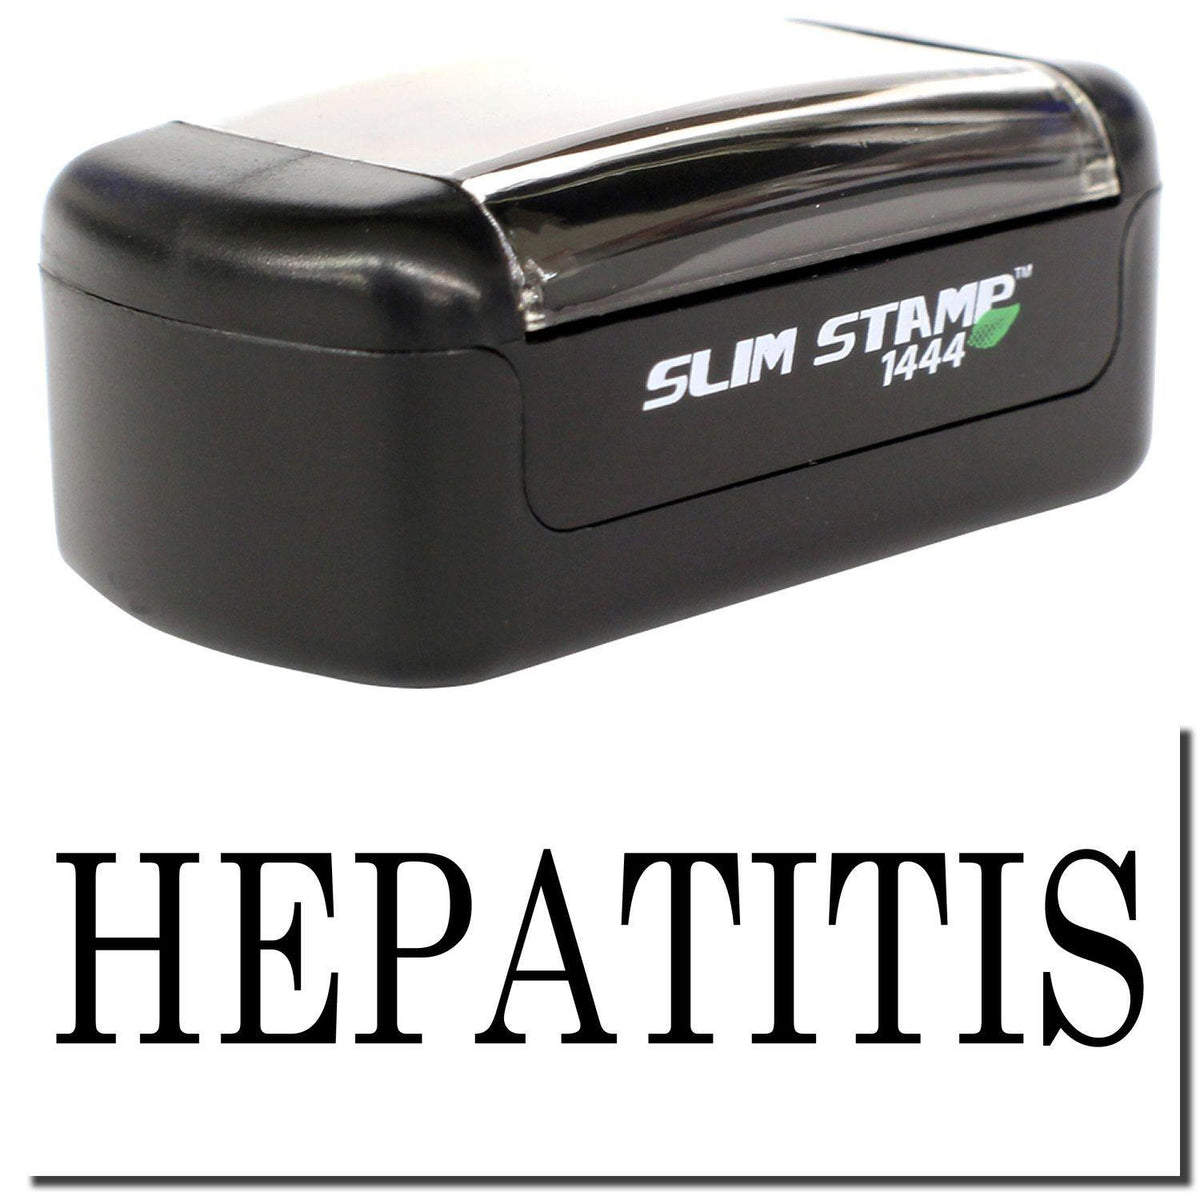 A stock office pre-inked stamp with a stamped image showing how the text &quot;HEPATITIS&quot; is displayed after stamping.